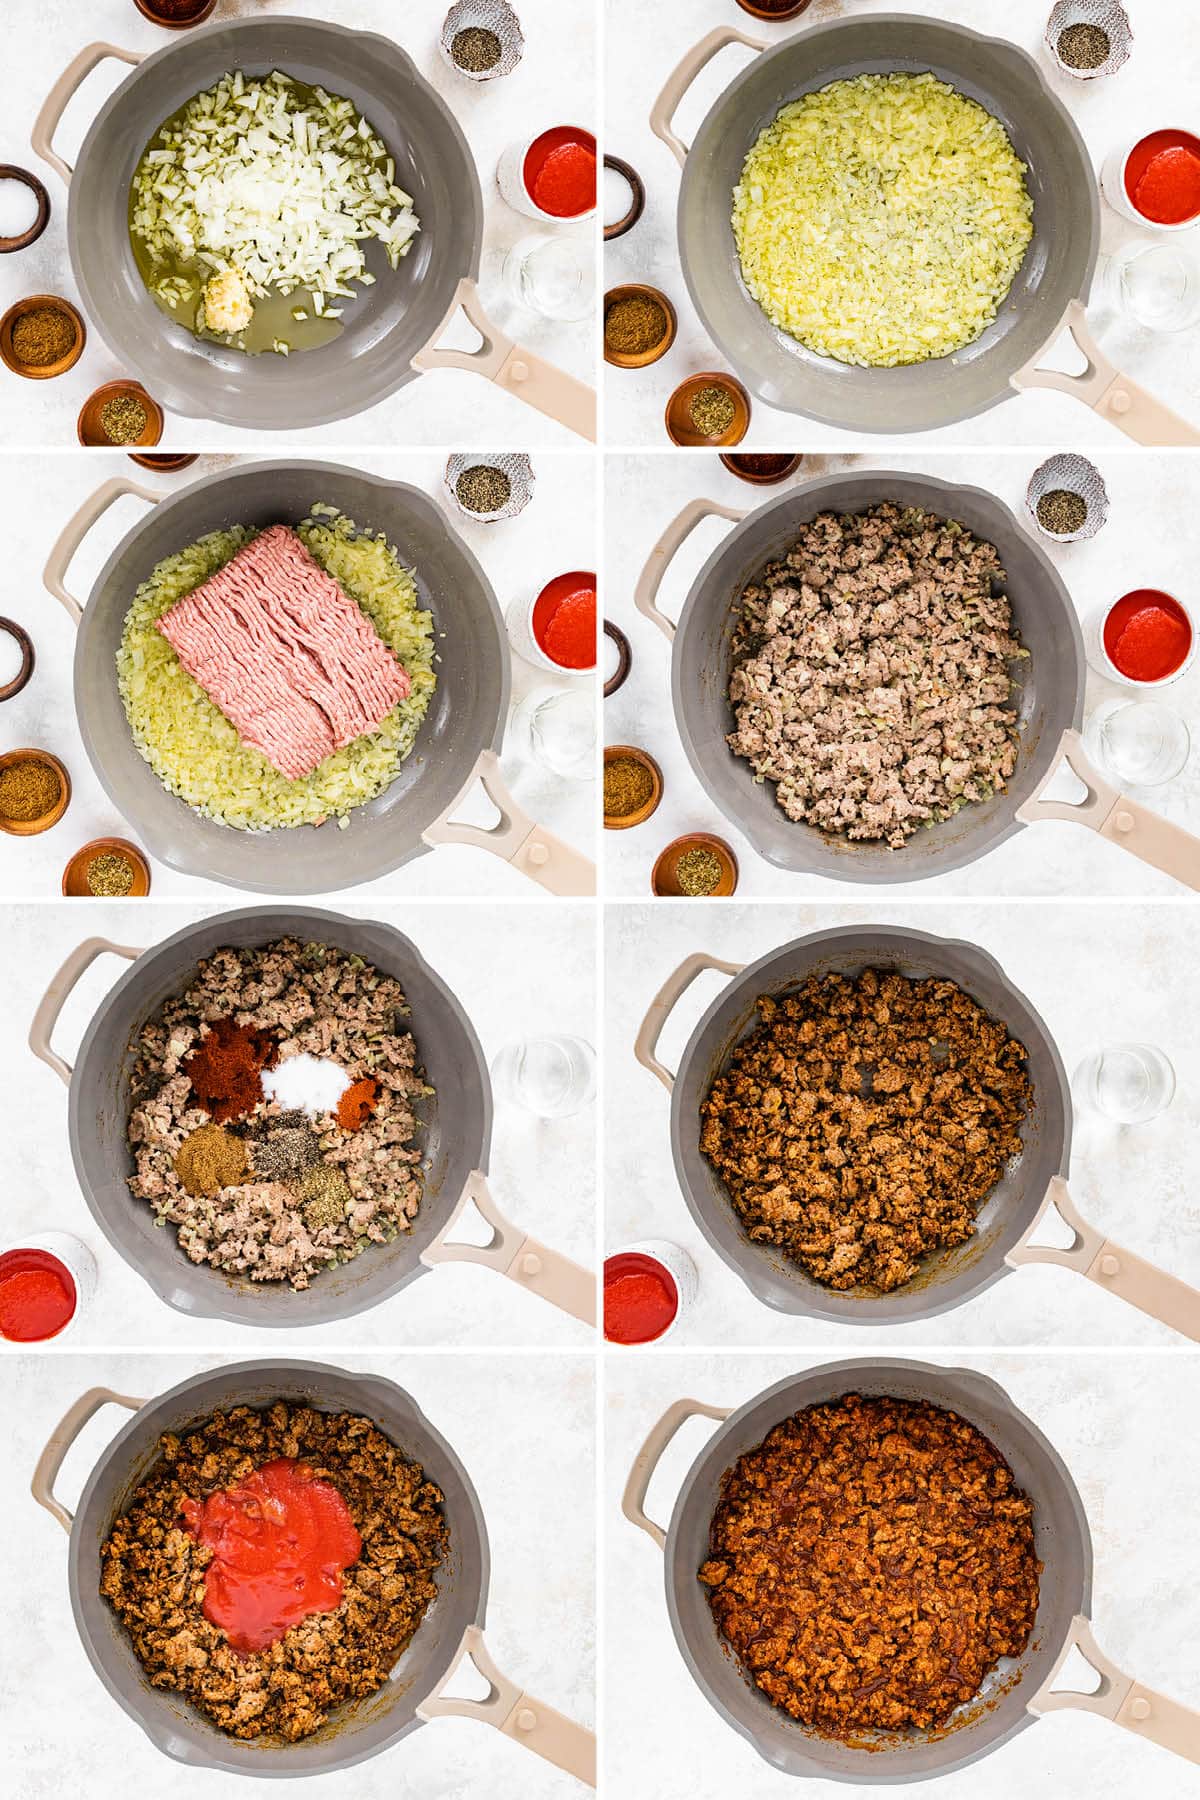 Collage of 8 photos showing how to make turkey taco meat for Turkey Taco Meal Prep Bowl: browning onion, adding the ground turkey, more spices and tomato sauce.